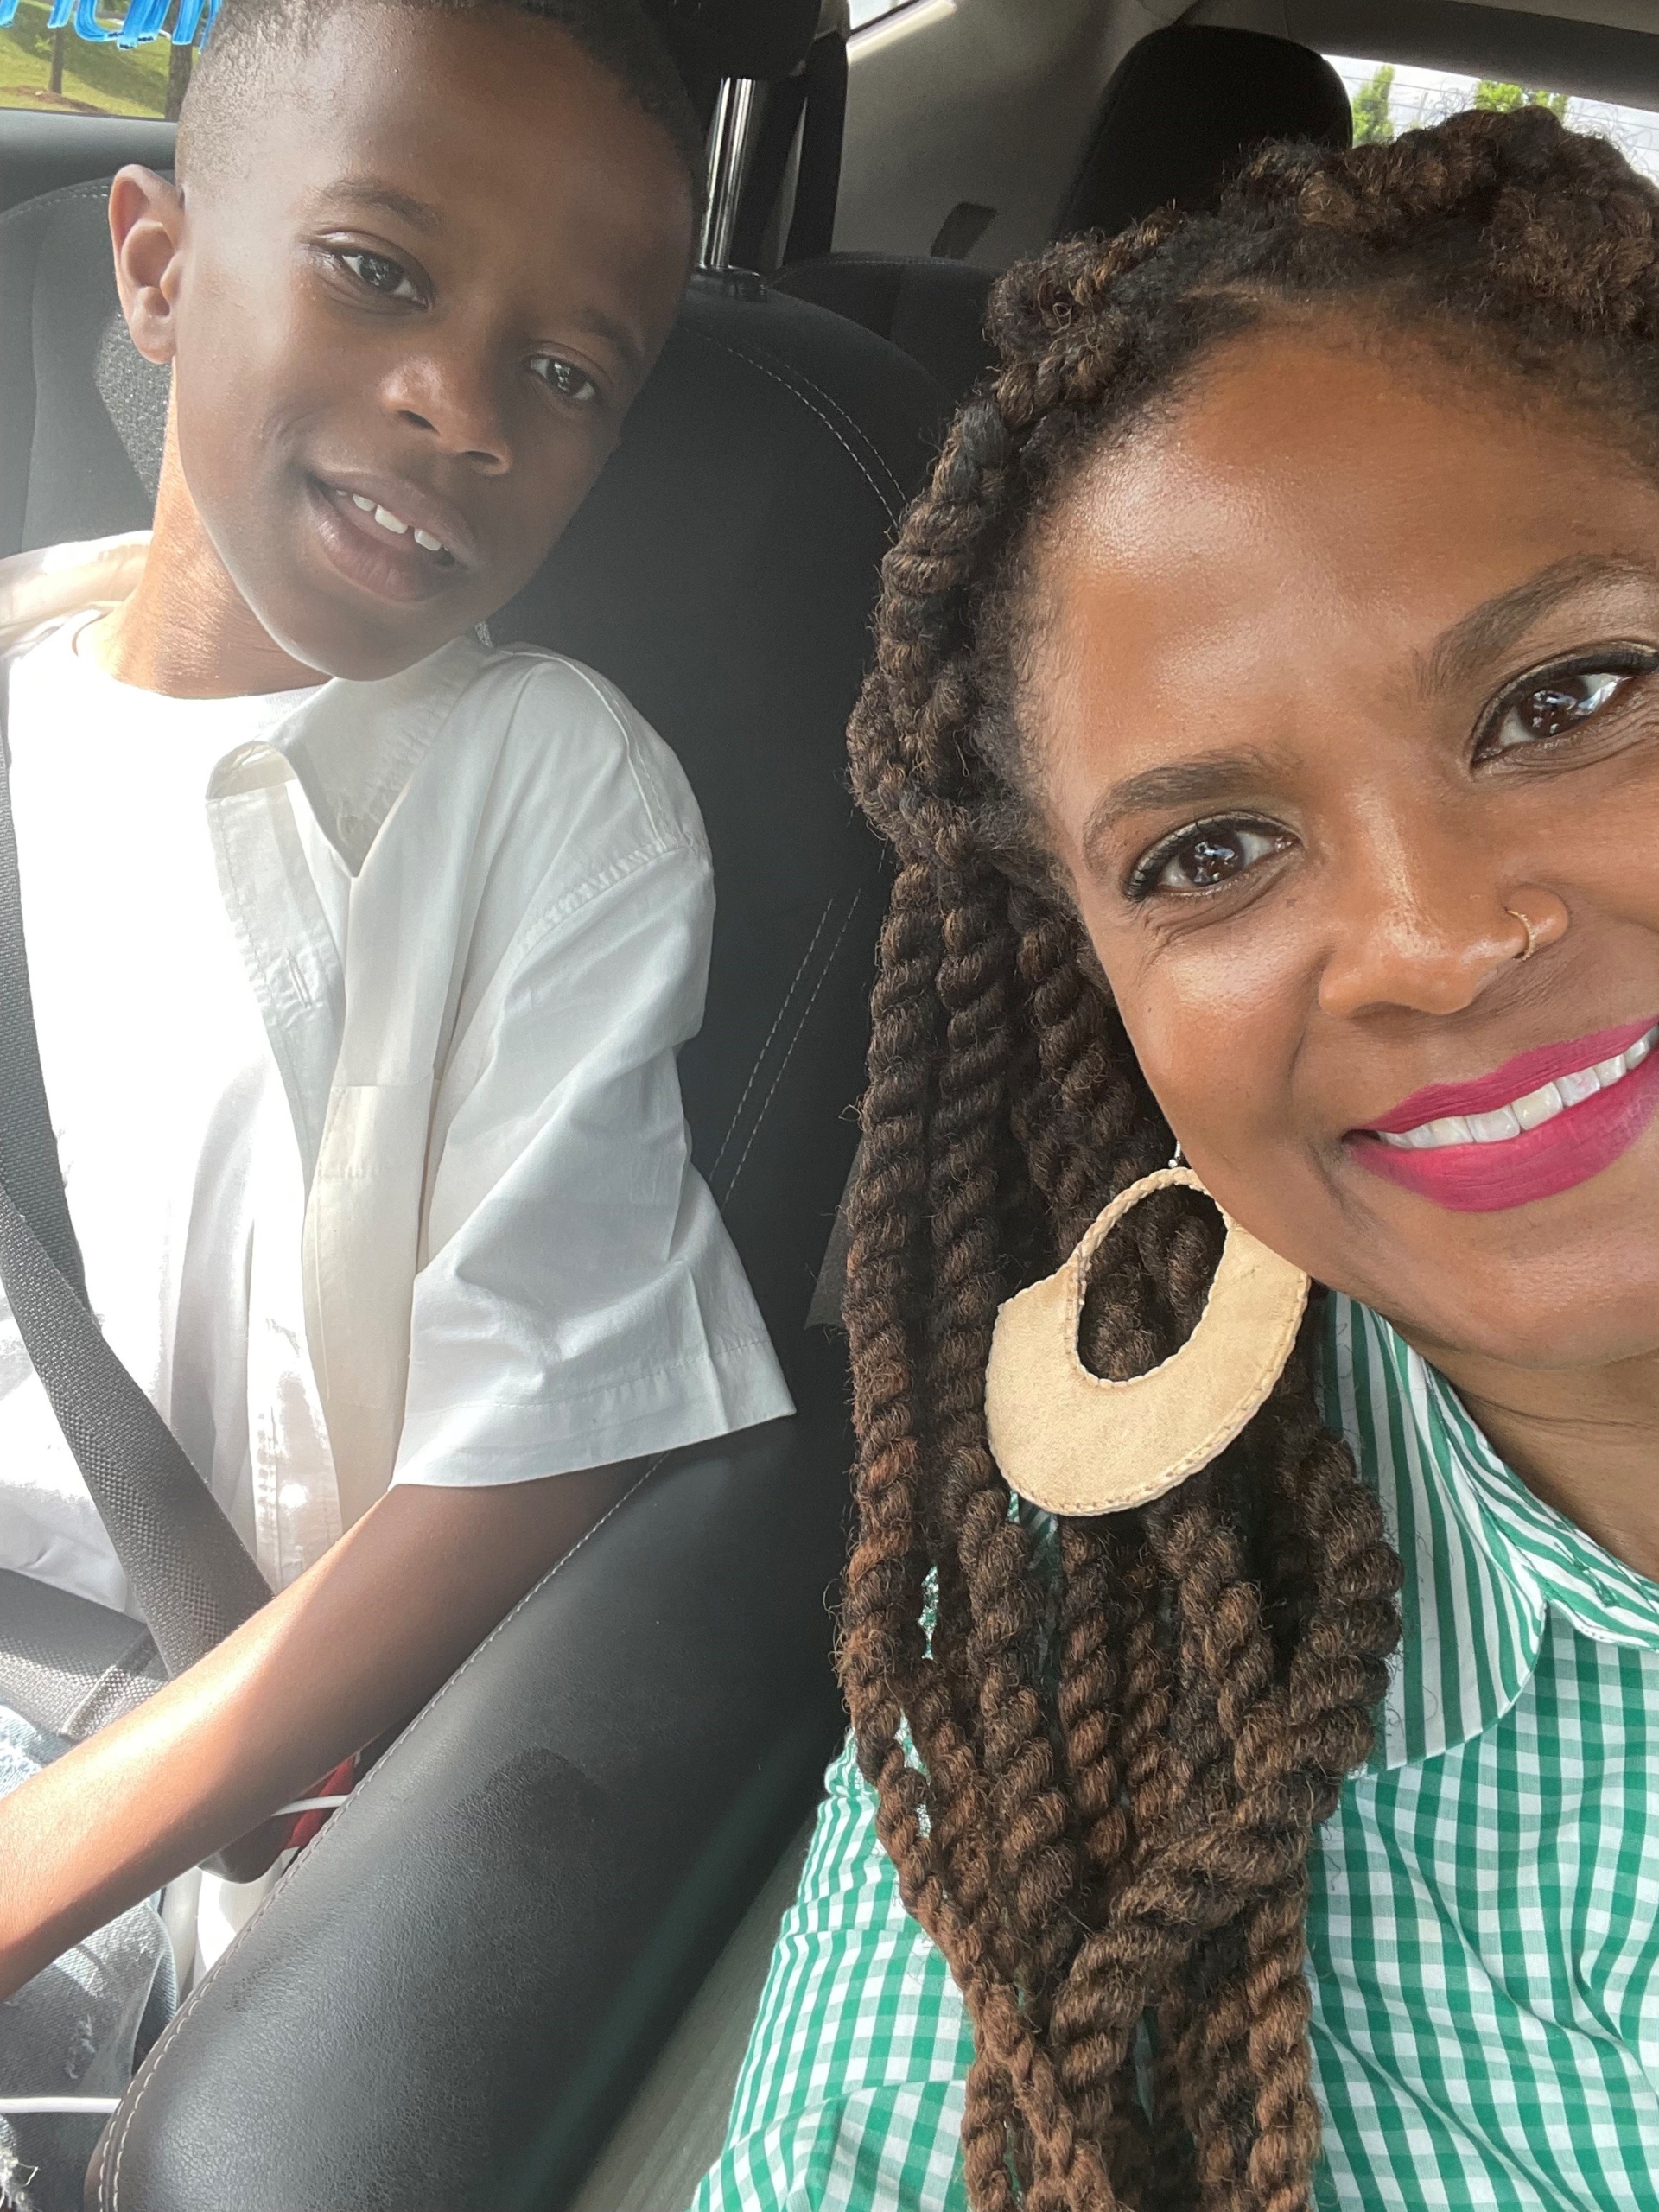 A mom and her son sit in a car, smiling for a selfie. The son is young, and both are Black. The mom is wearing large round white earrings, red lipstick, a green dress, and the son is wearing a white t shirt. 